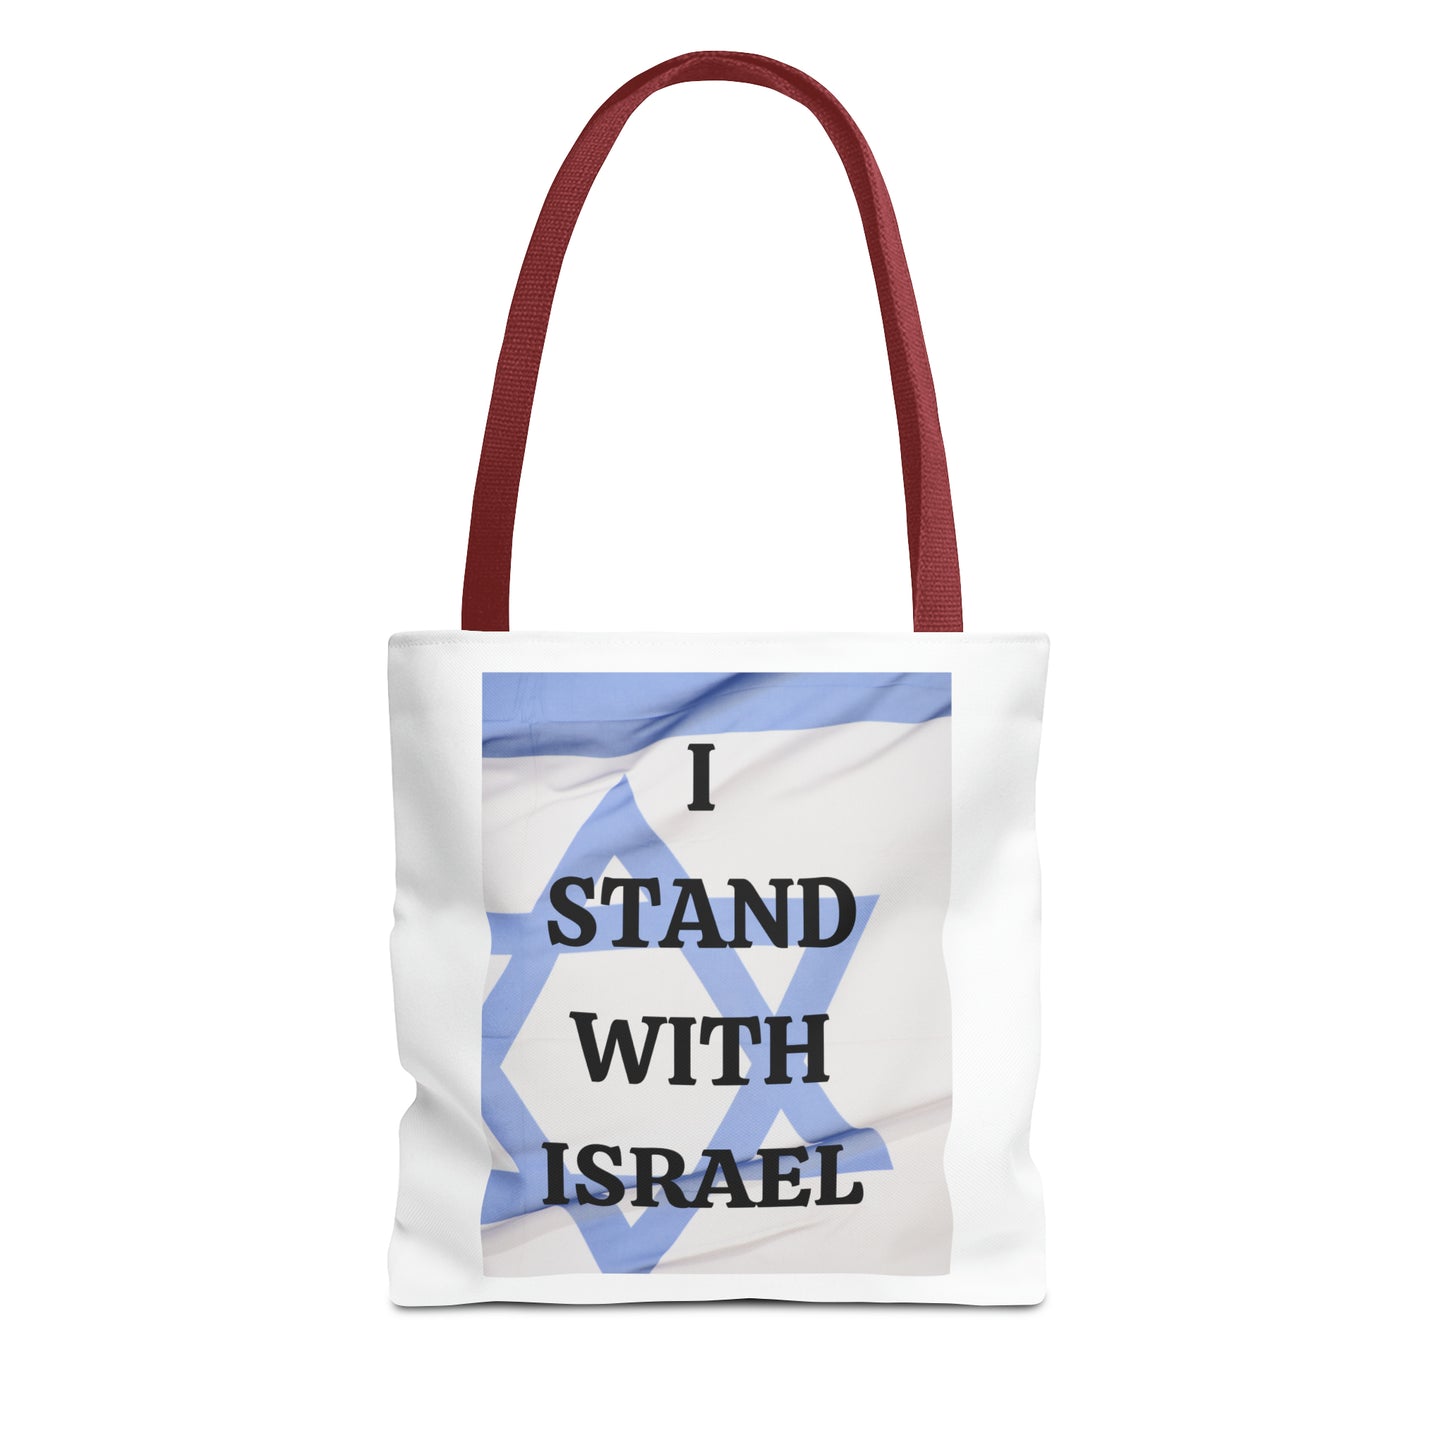 I stand with Israel - Tote Bag